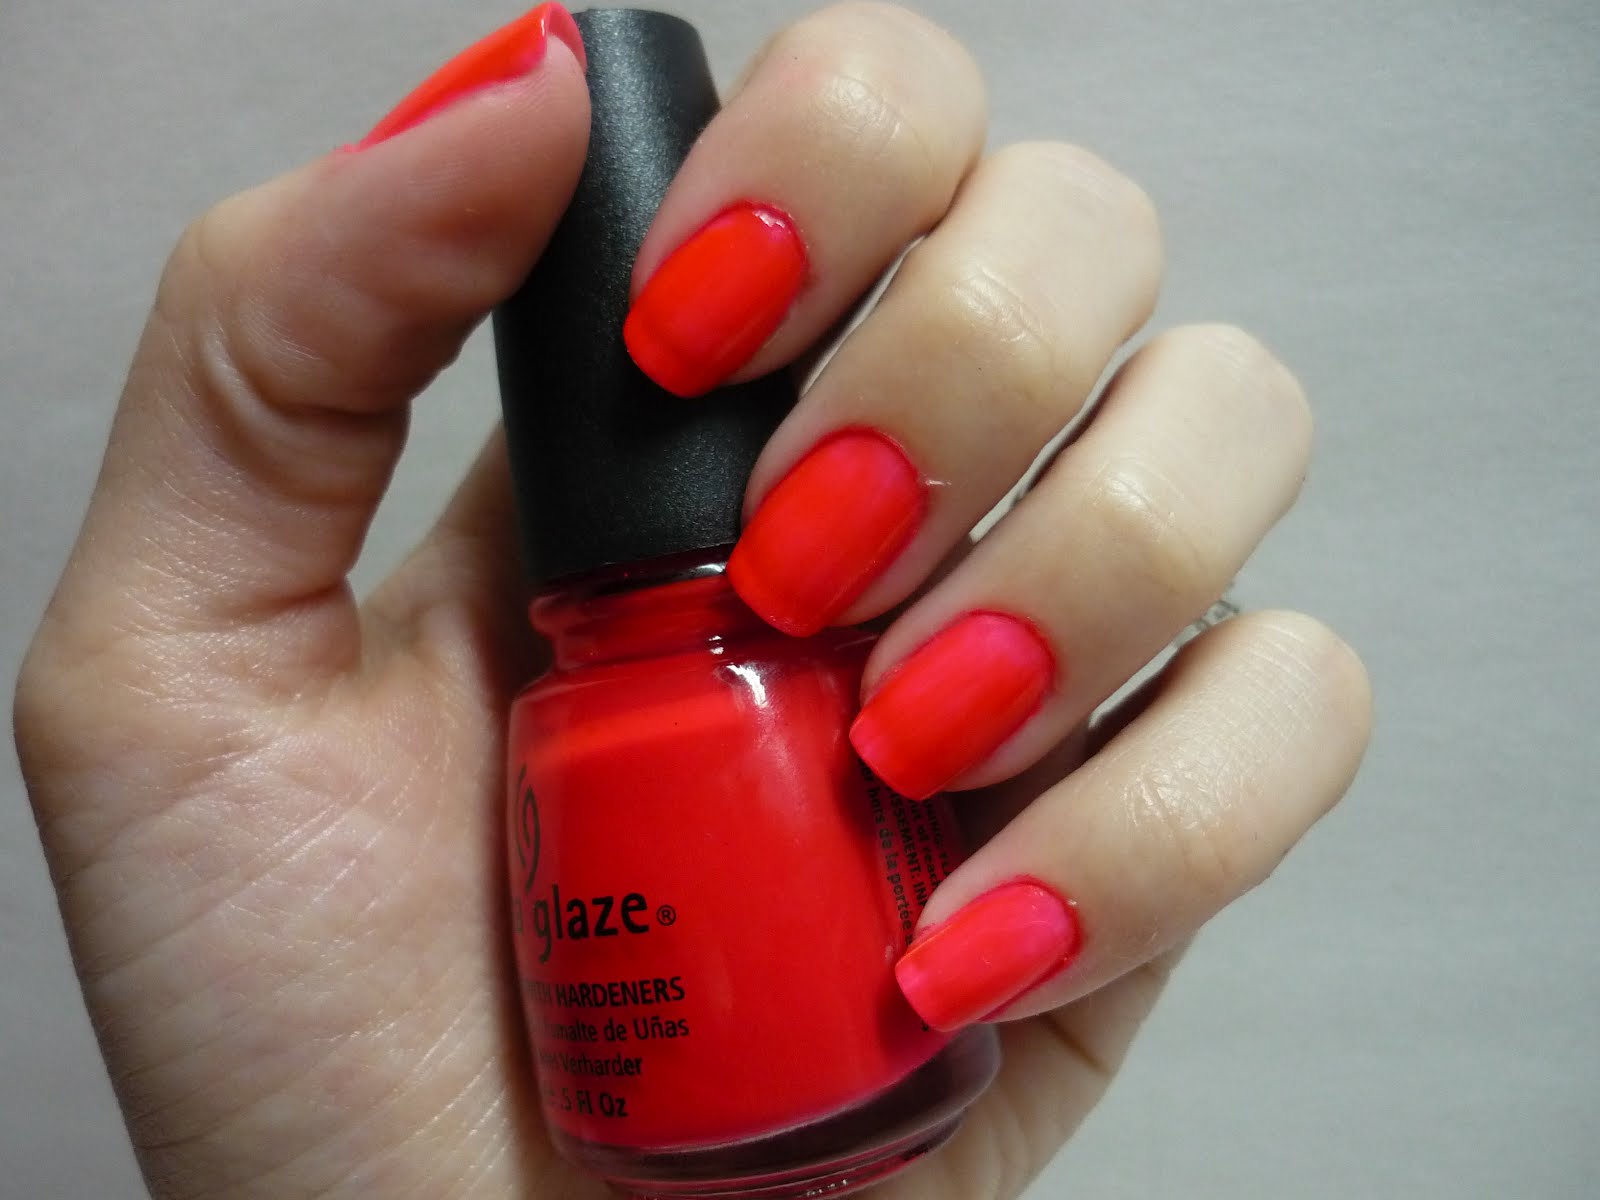 5. China Glaze Nail Lacquer in "Rose Among Thorns" - wide 10